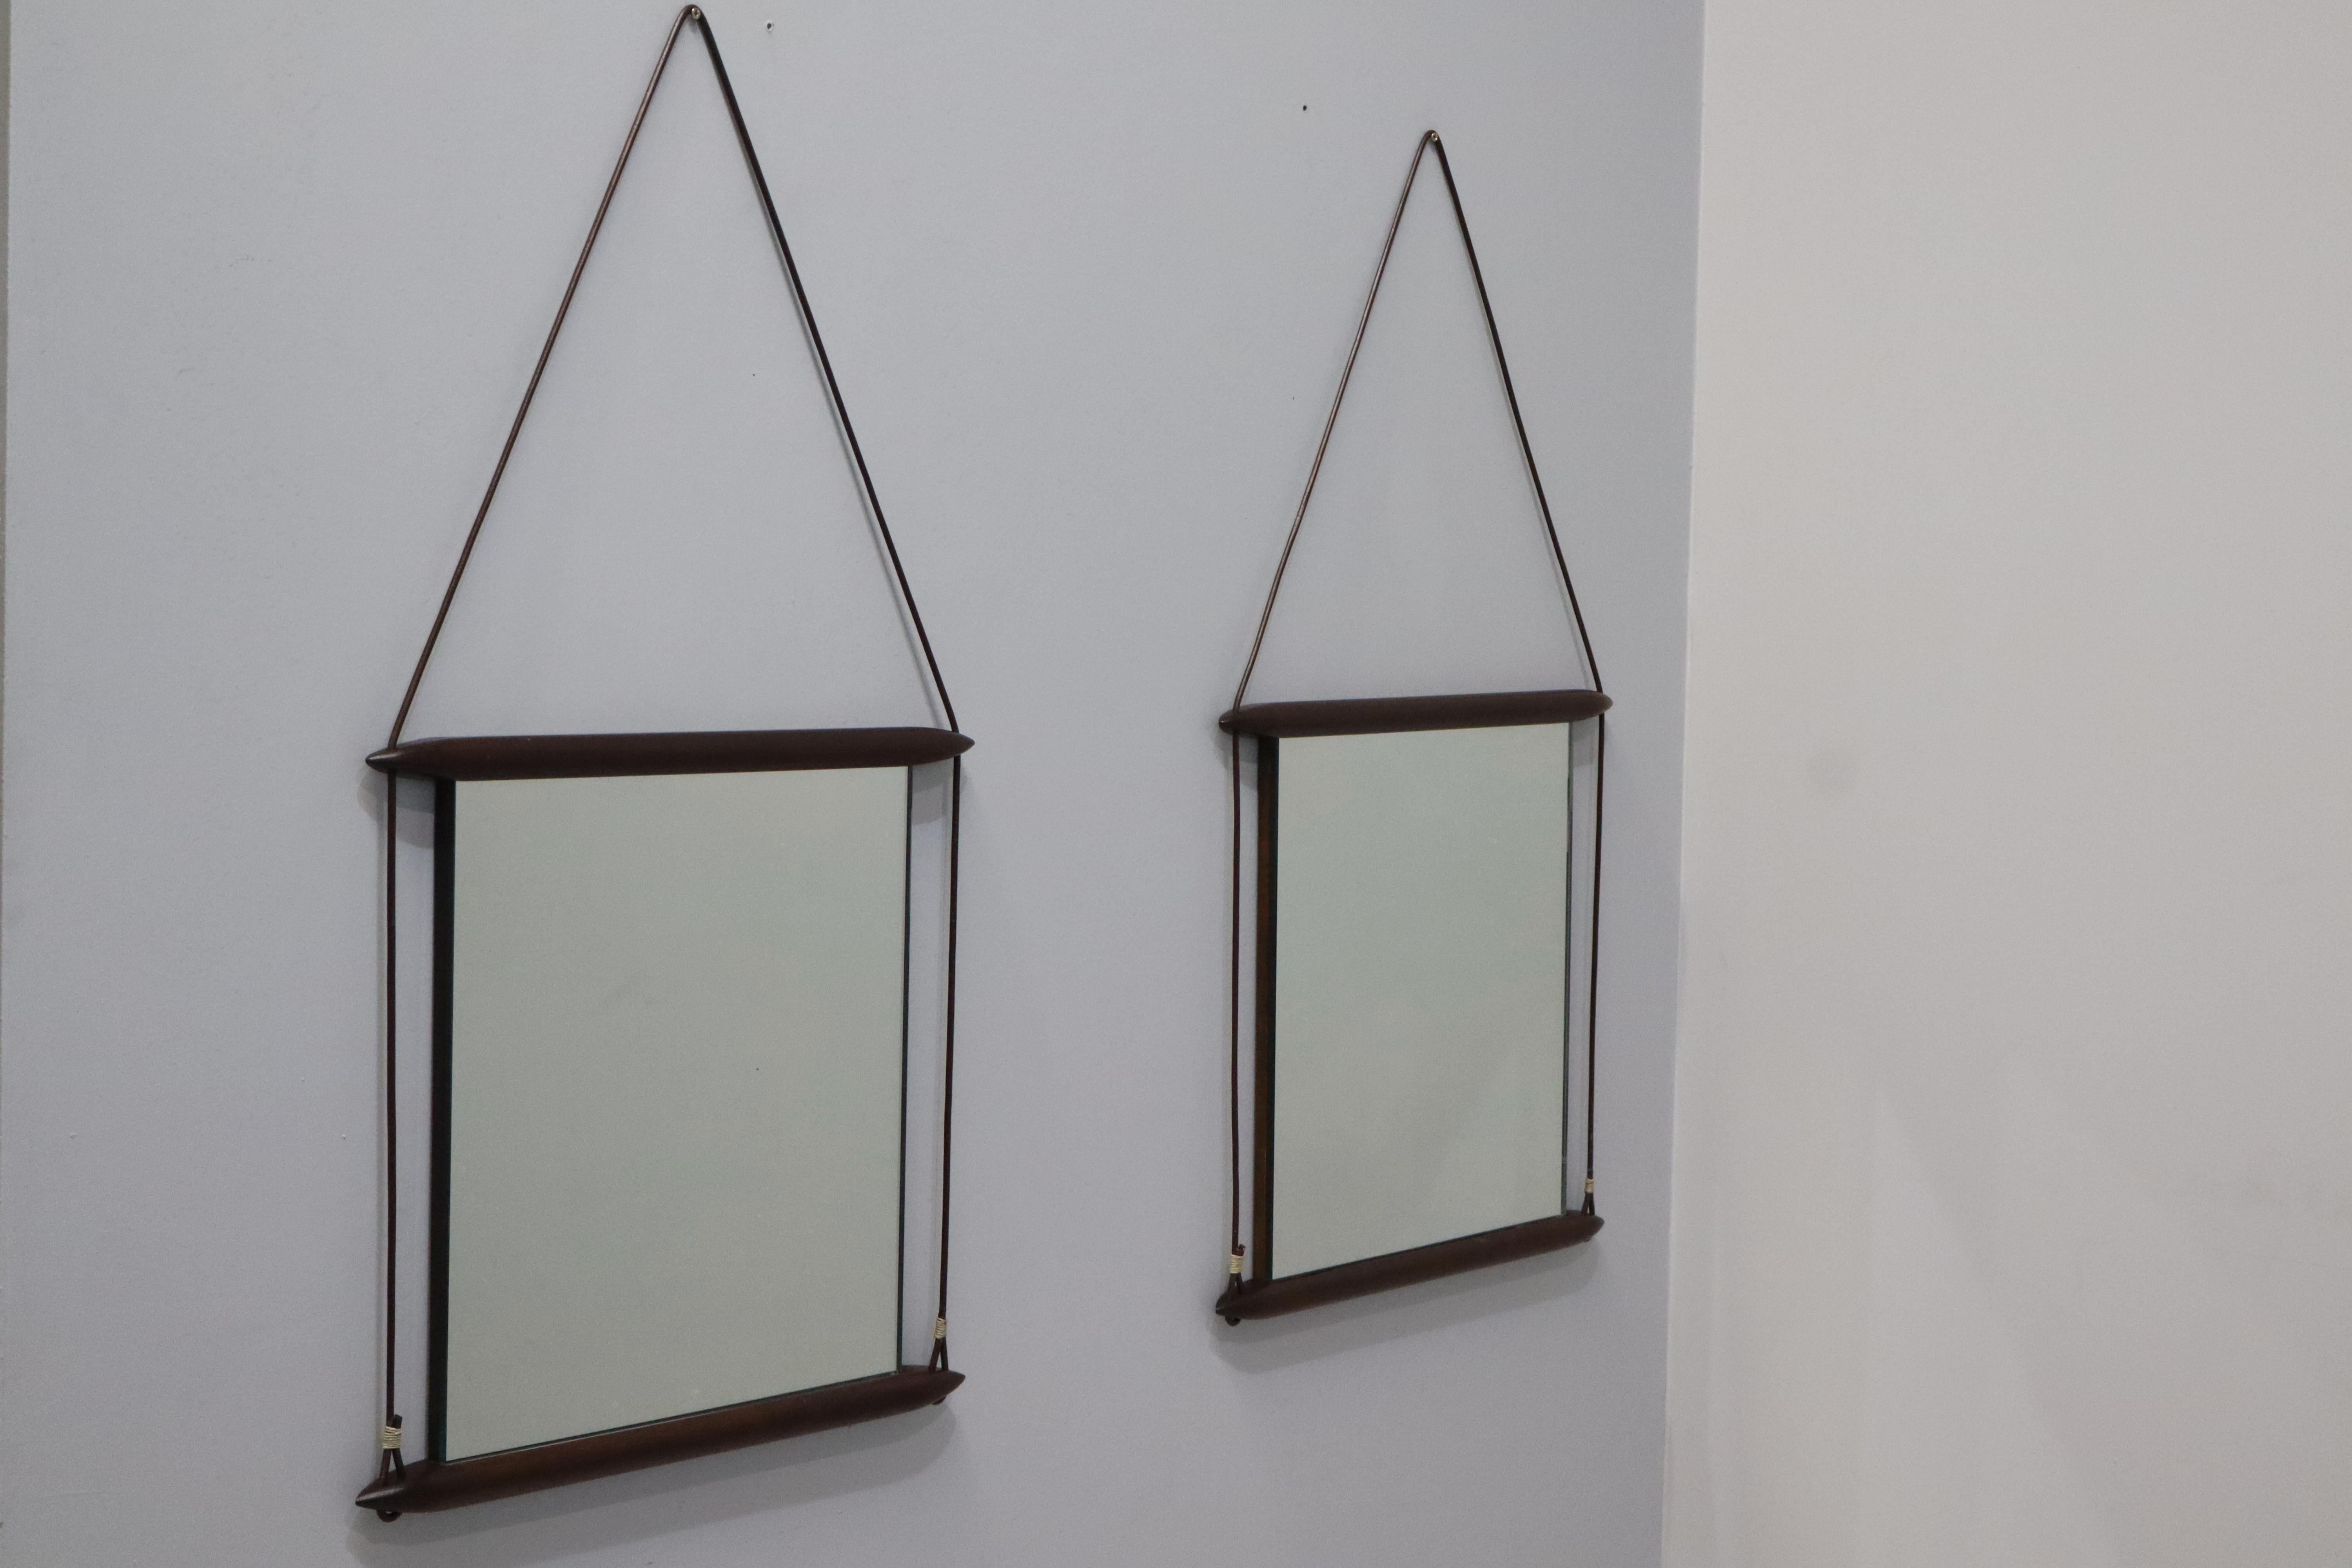 Wall mirrors designed by Ico Parisi in the late 1950s and produced by Mobili Italiani Moderni (MIM). 
The frame of the mirror is in wood and Leather Ribbon. 
The back of the mirror is also made of wood and has the MIM mark and serial number , as